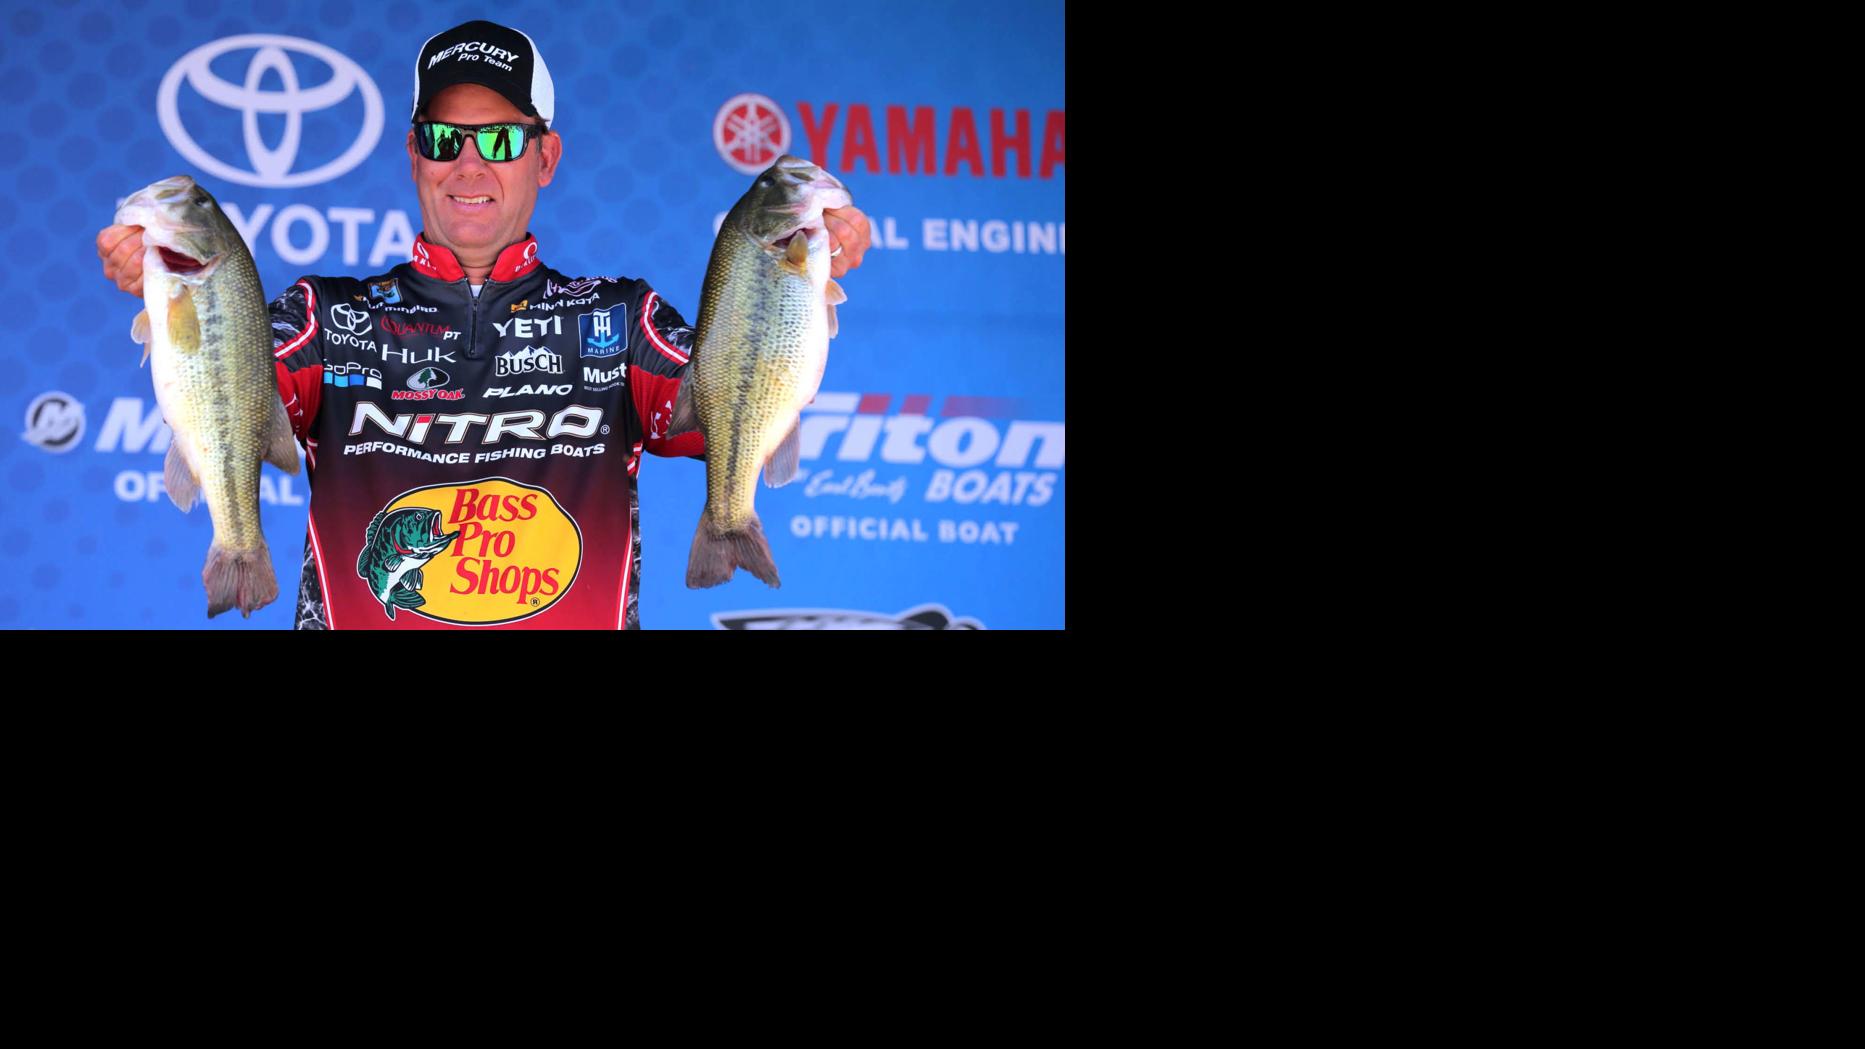 Kevin VanDam chasing 80 pounds to clinch BASS Elite tournament on Grand